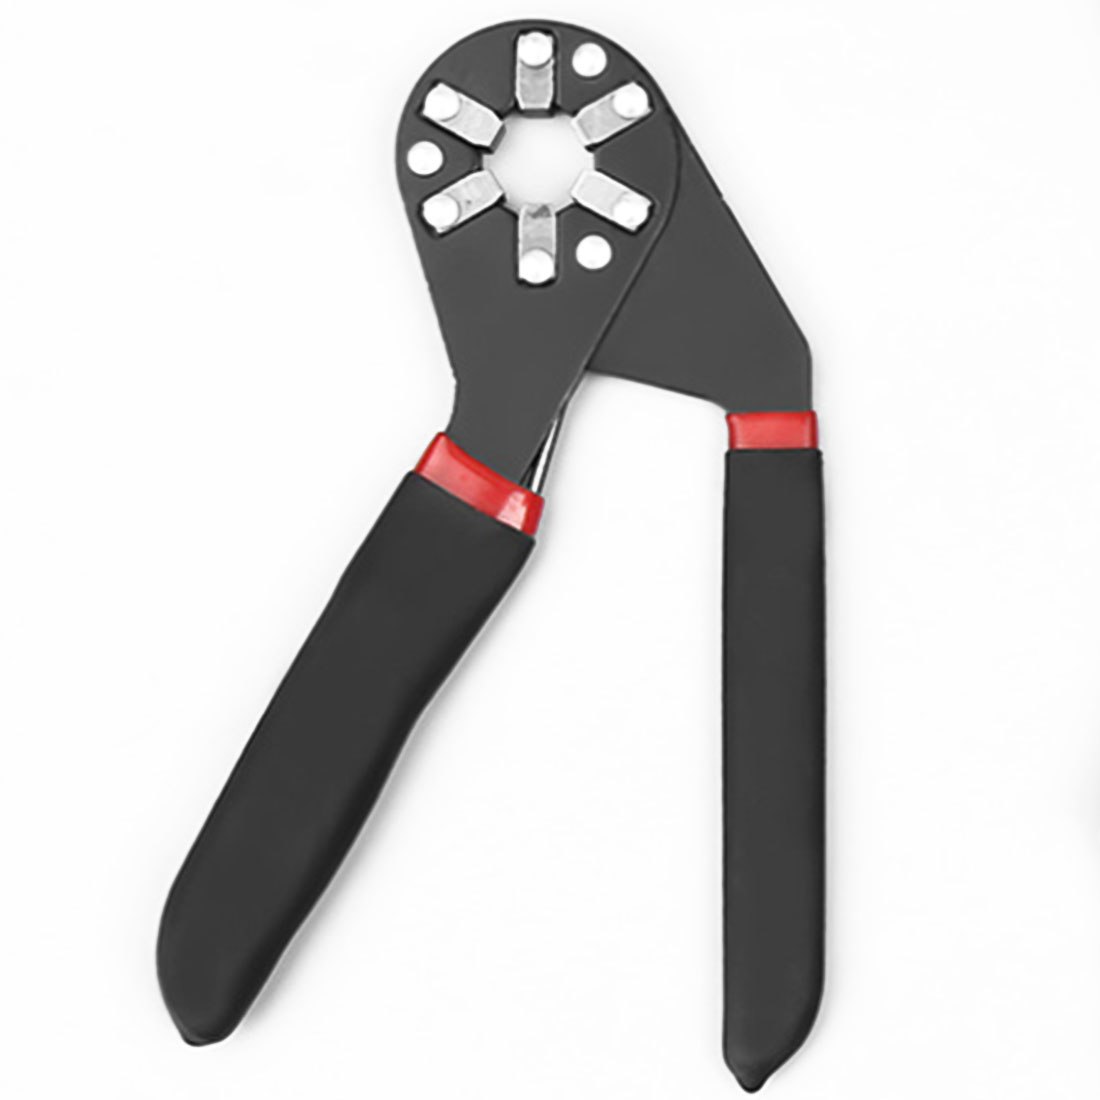 Magic wrench 14 in 1 best tool - Minihomy